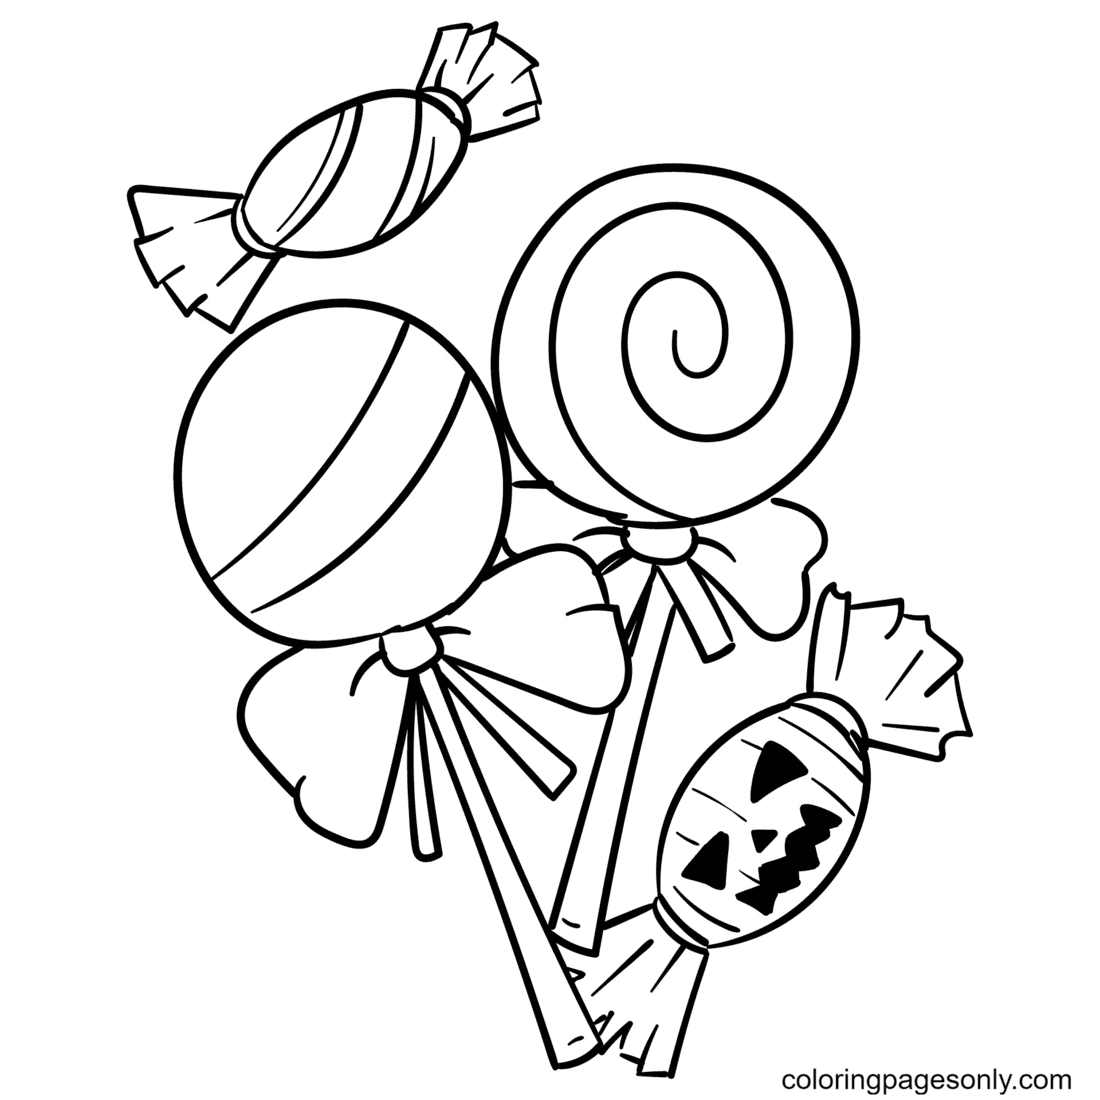 Candy coloring pages printable for free download